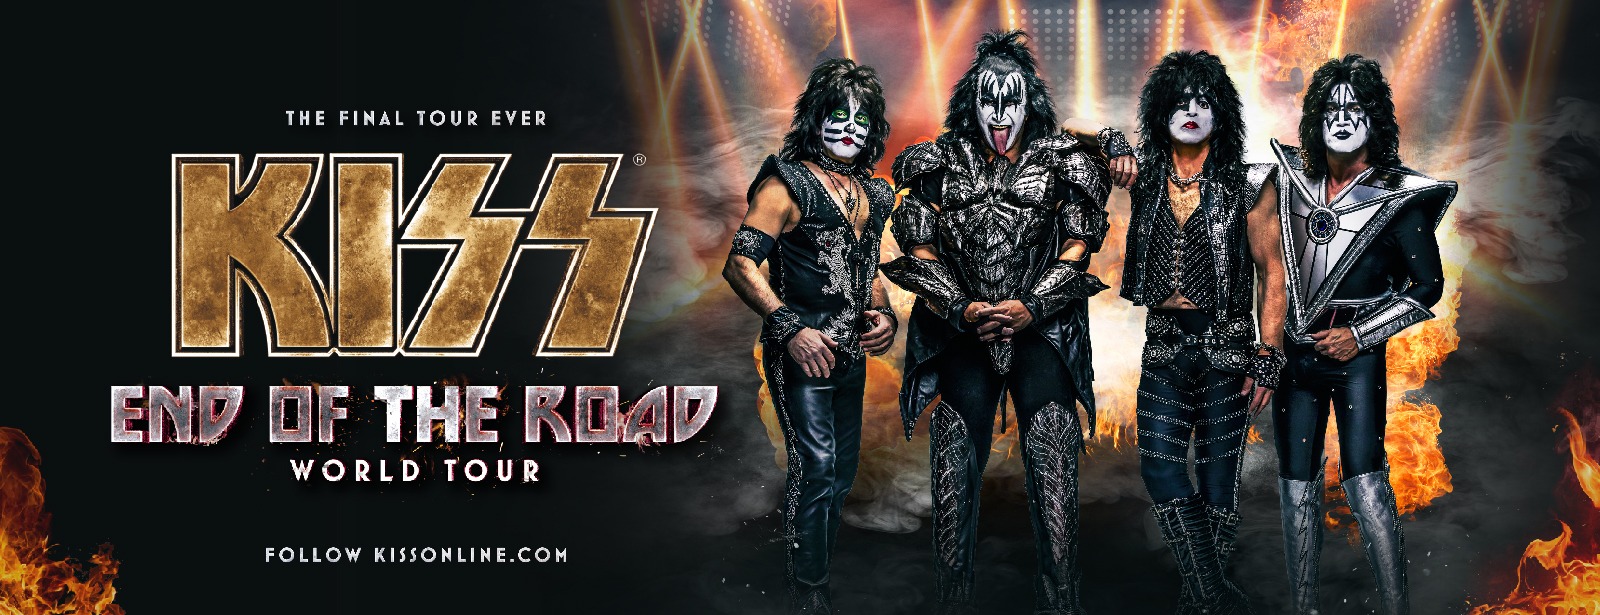 Kiss Live Concert in Coca-Cola Arena (CANCELLED) - Coming Soon in UAE